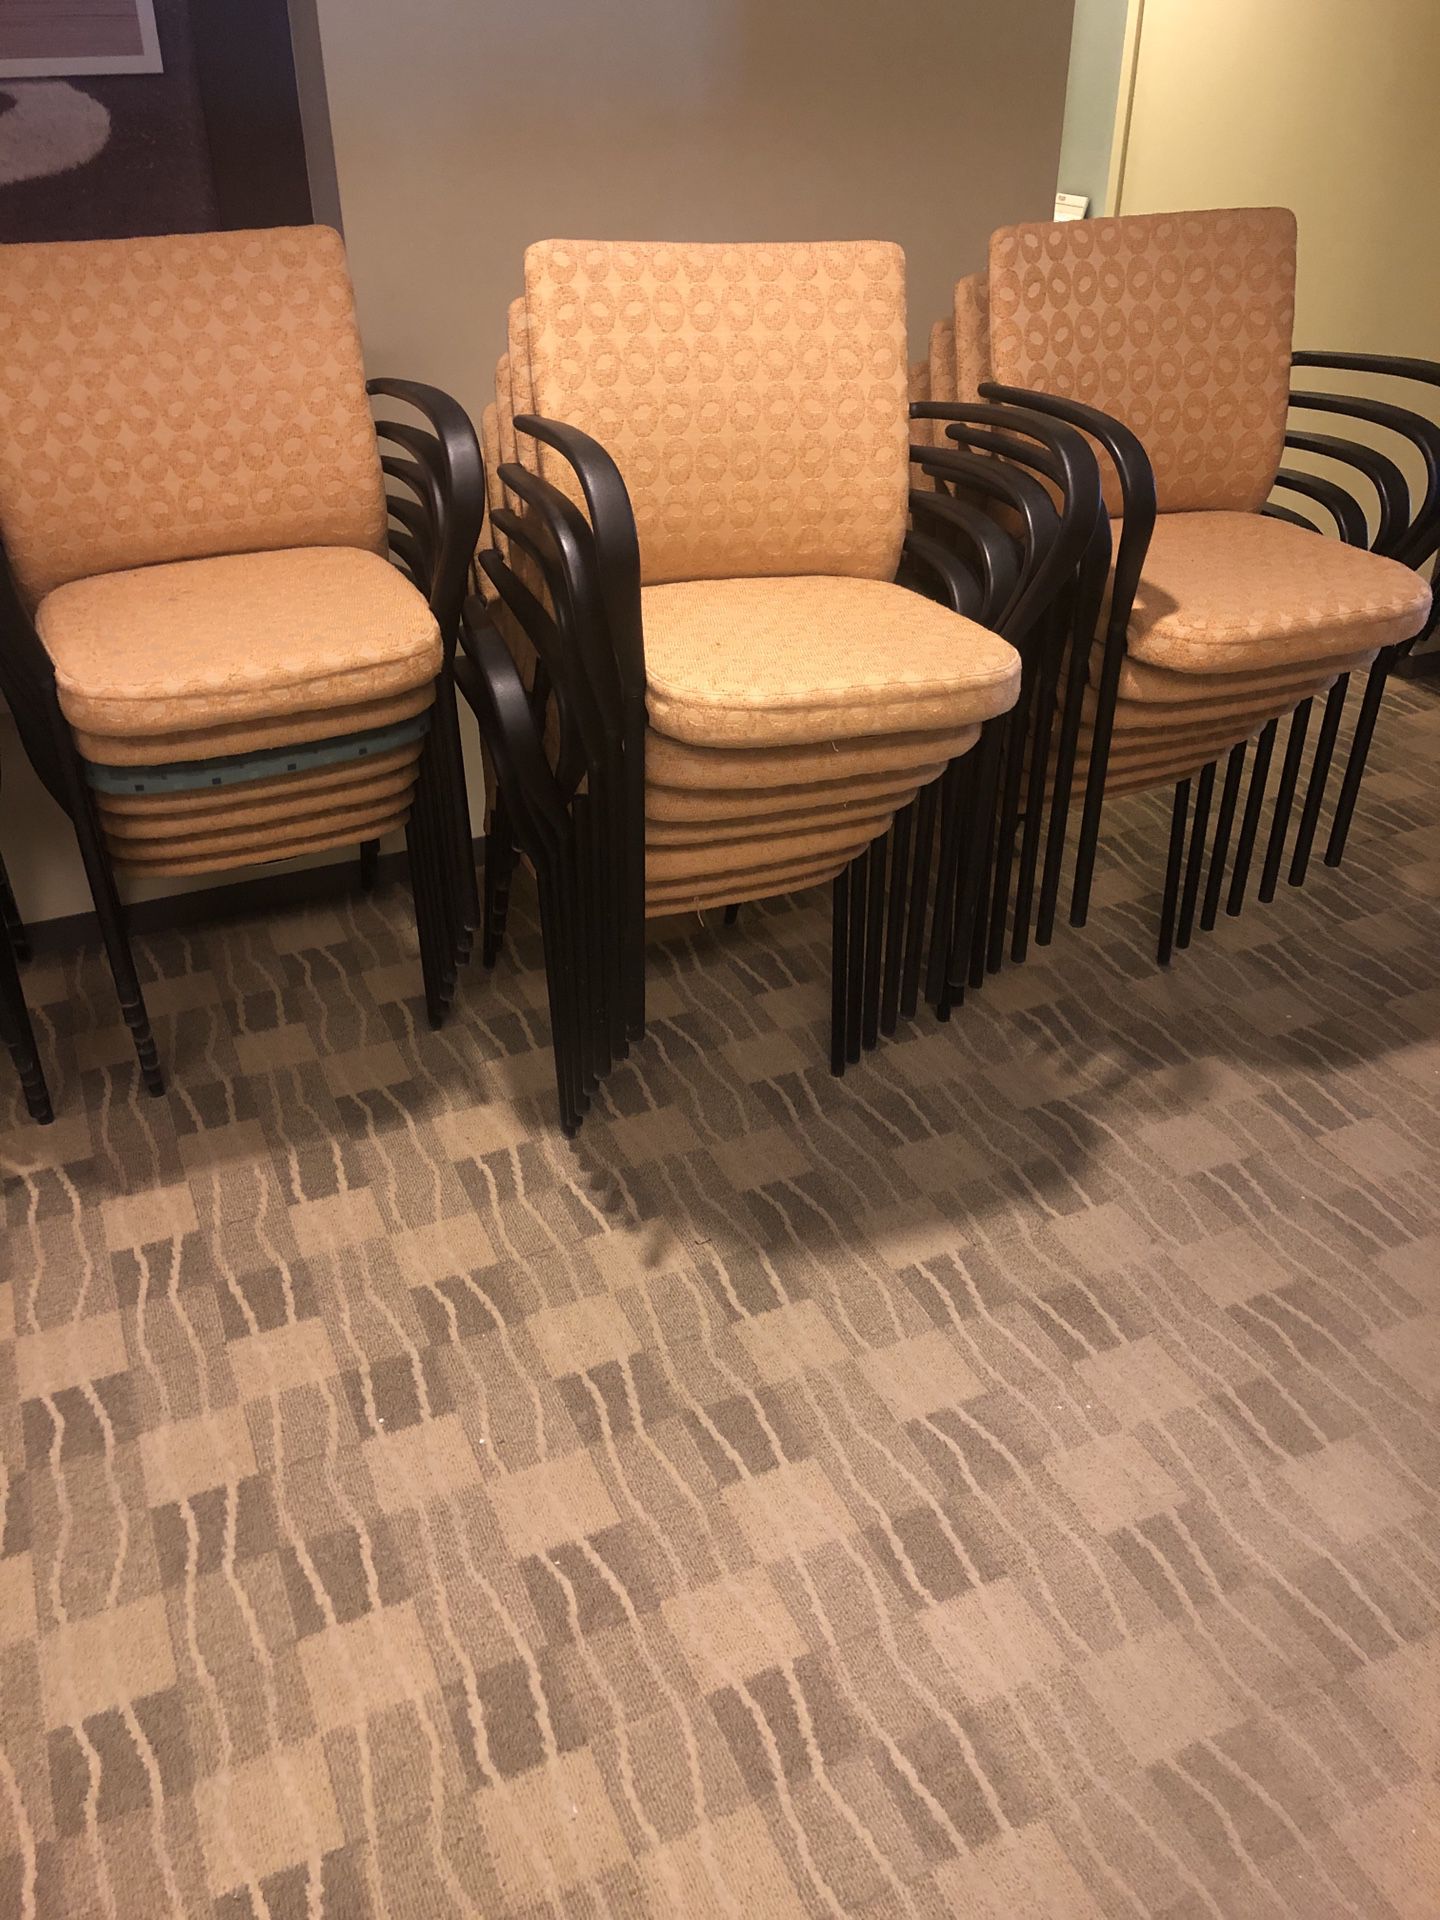 7 Conference chairs $15 each